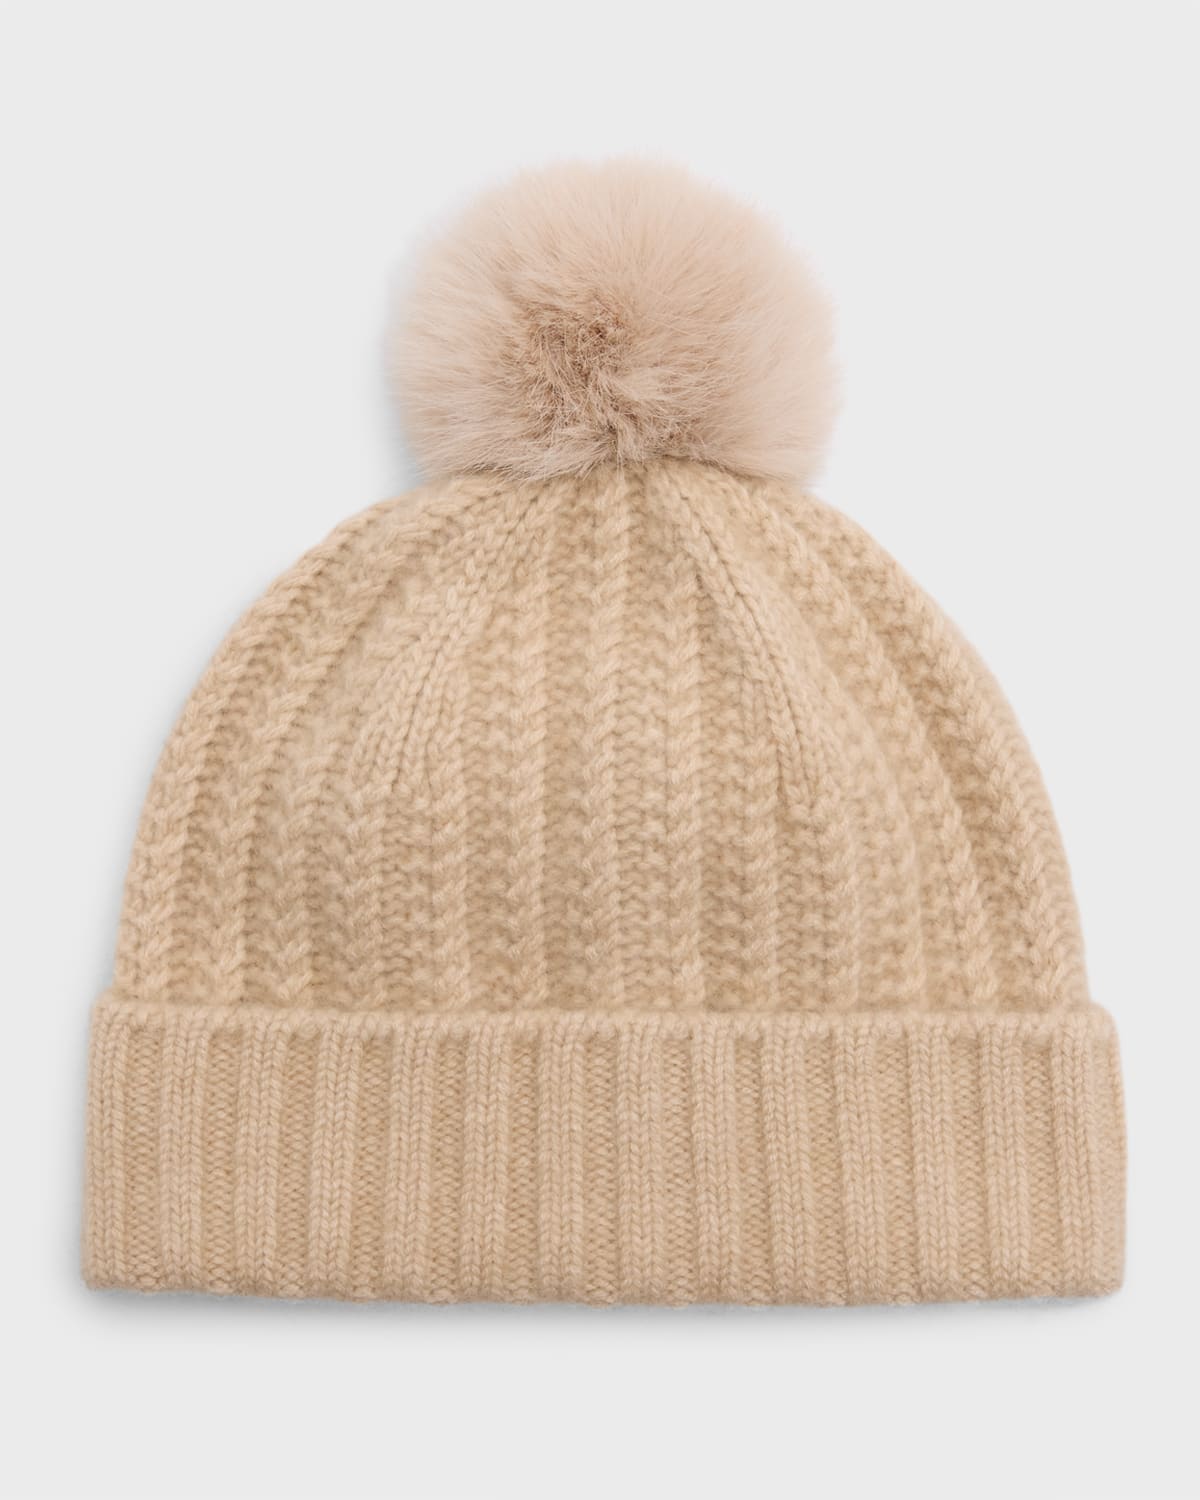 Sofia Cashmere Braided Knit Cashmere Beanie With Faux Fur Pom In Plaited Oatmeal